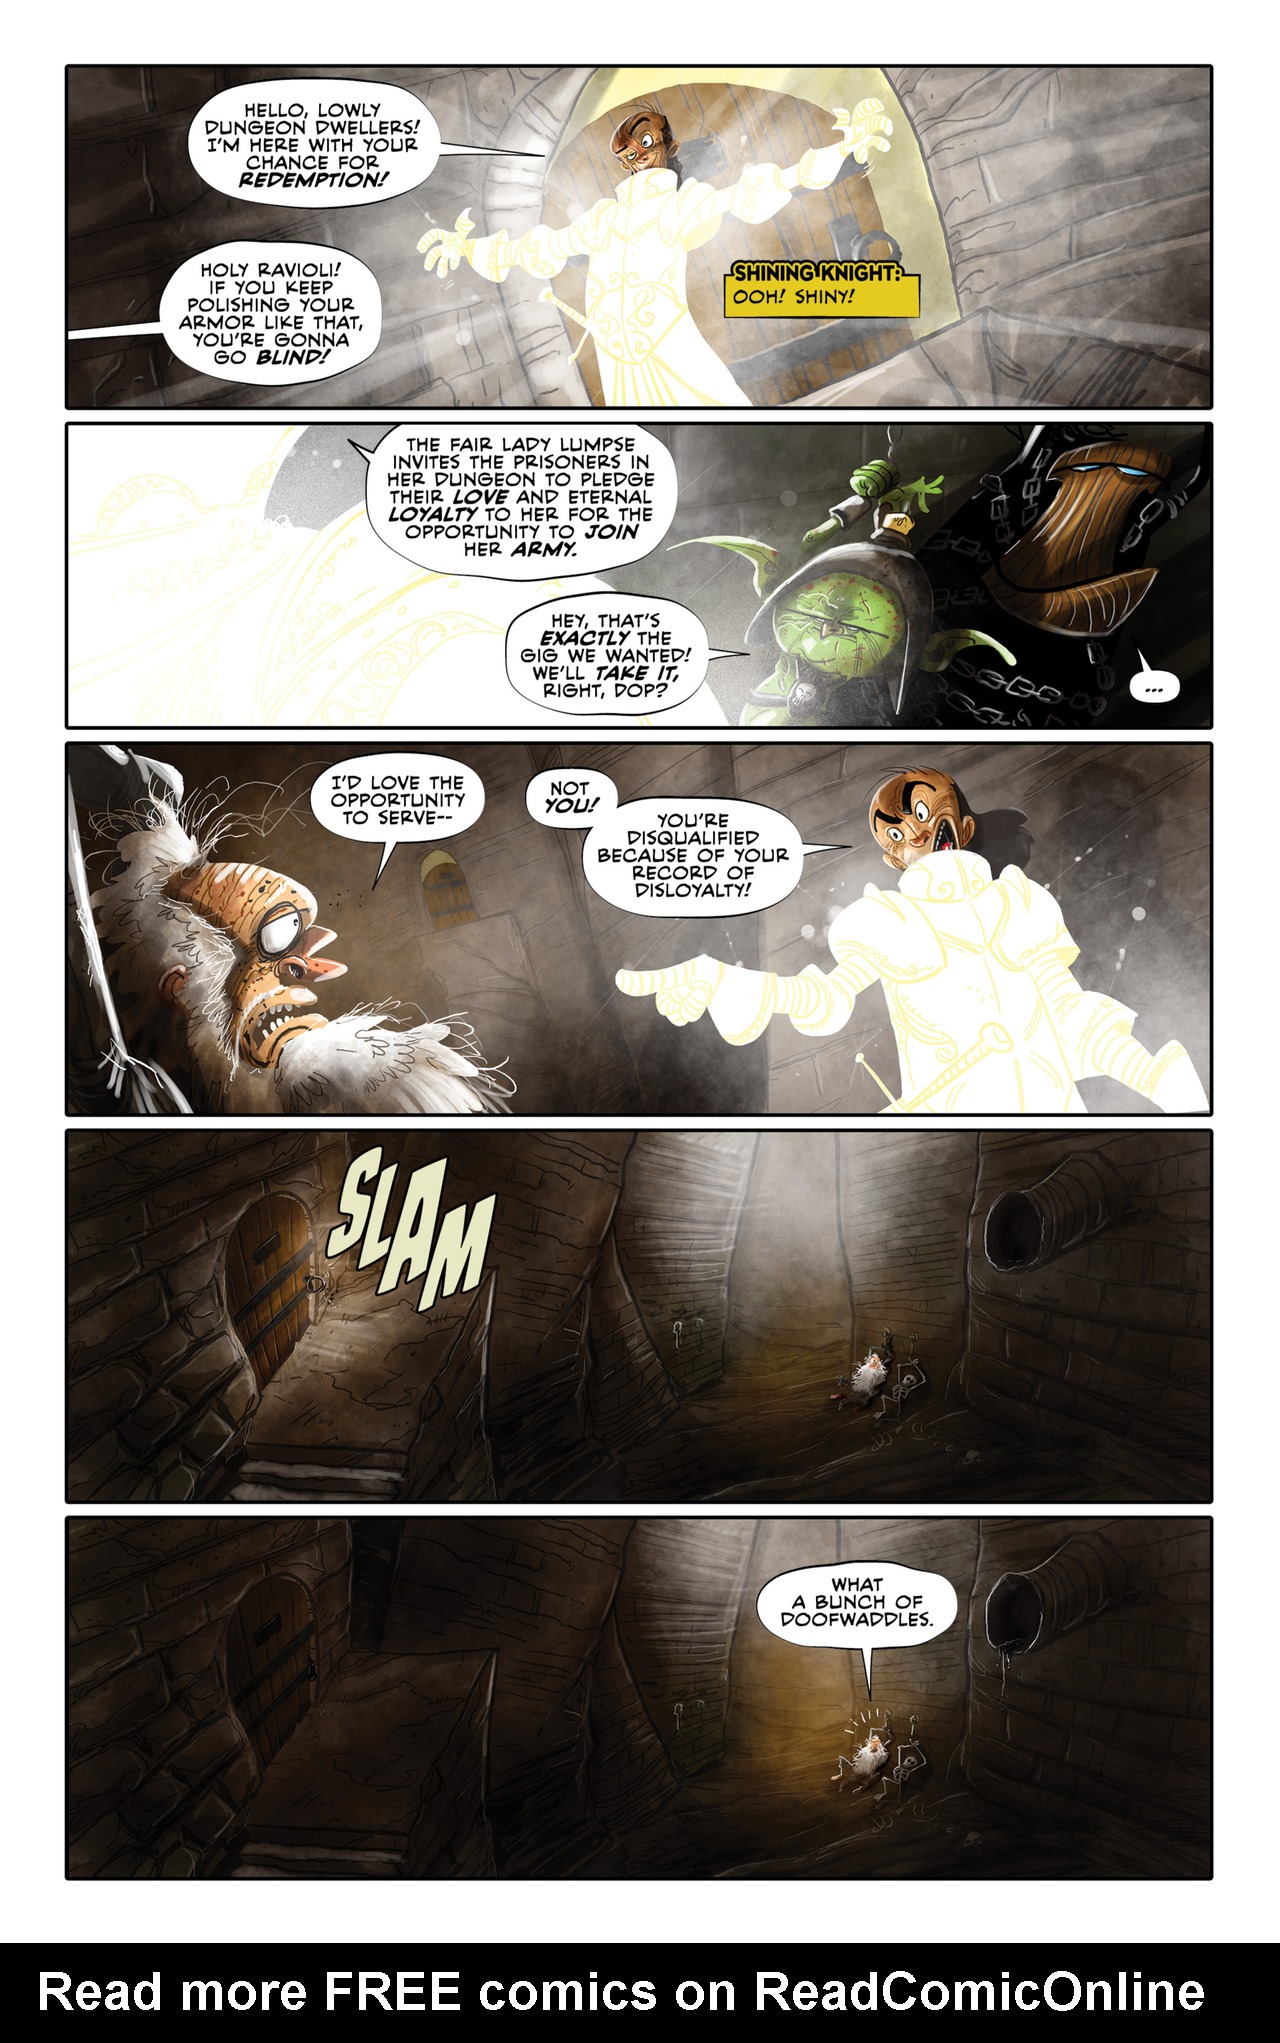 Read online Claim comic -  Issue #3 - 10